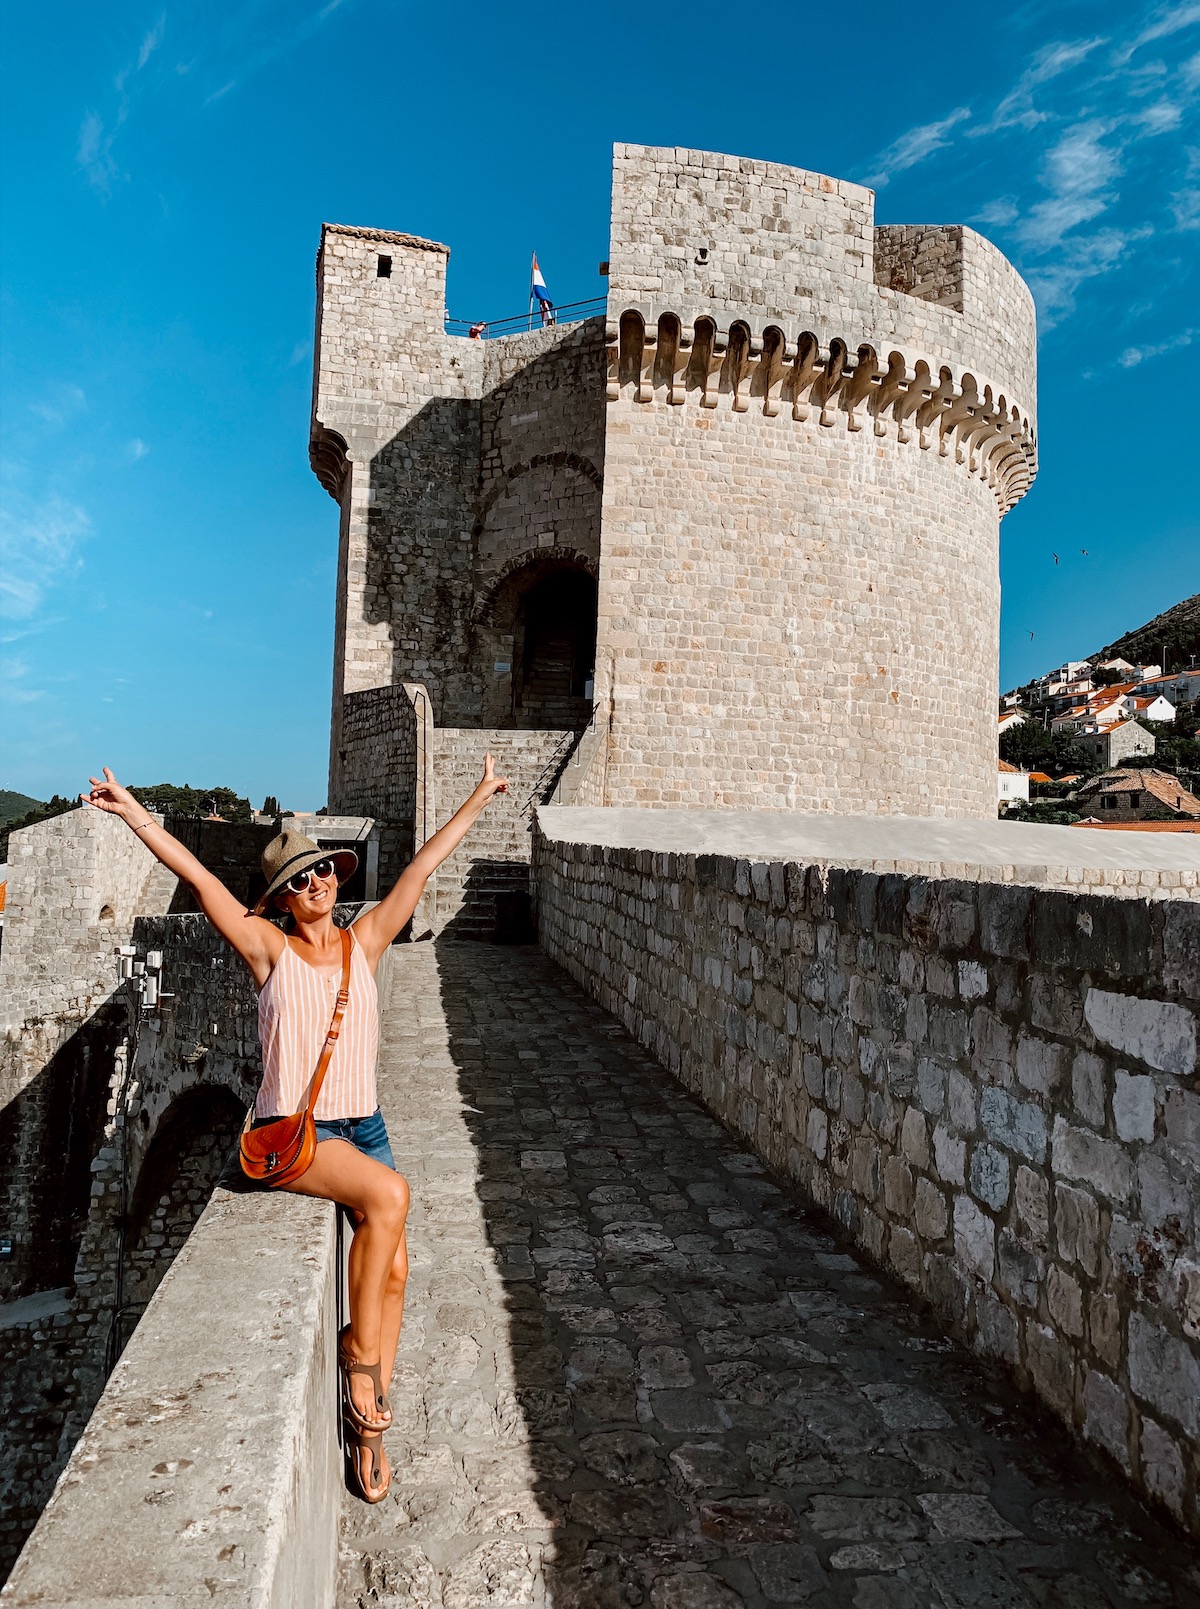 Eat+Stay+Play: Dubrovnik Travel Guide | Cathedrals & Cafes Blog